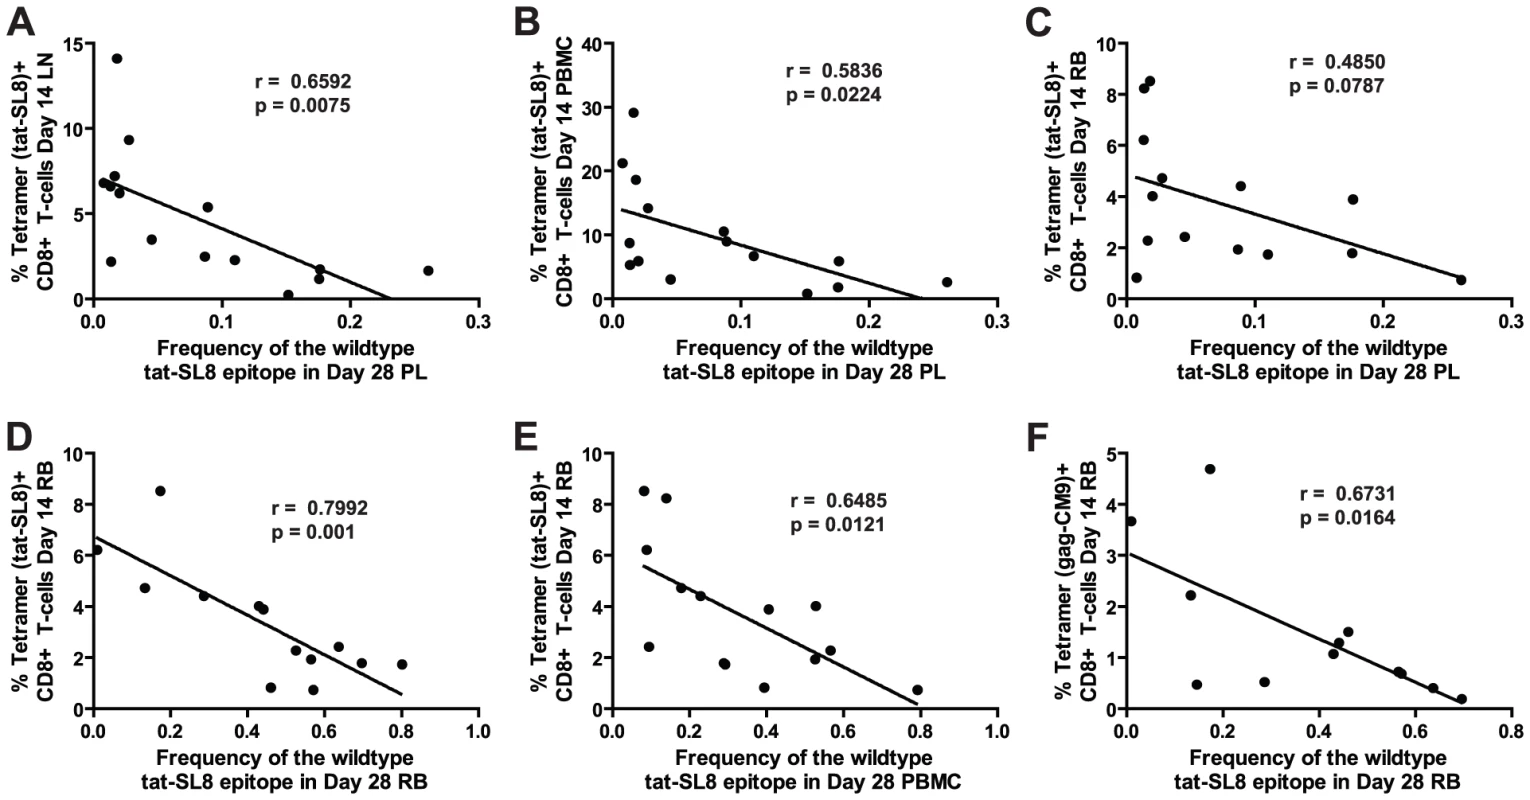 Anti-SIV immune responses in lymphoid tissues and rectal mucosa at day 14 post infection were significantly correlated with the level of tat-SL8 escape at day 28 post infection in the plasma virus and rectal mucosa, respectively.